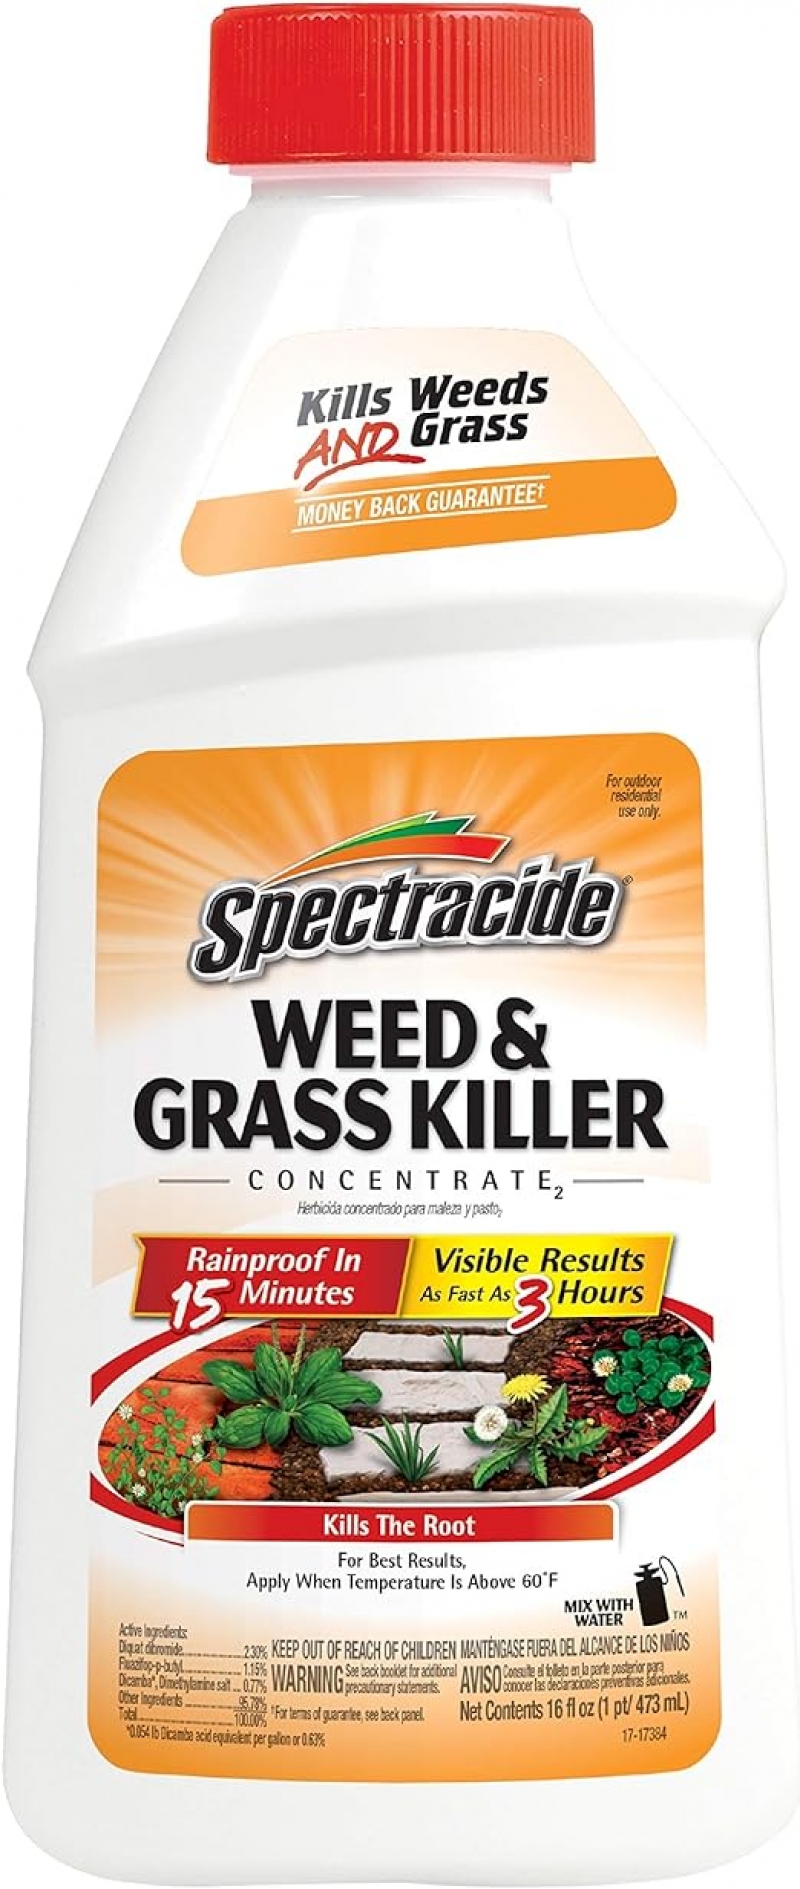 ihocon: Spectracide Weed And Grass Killer Concentrate 浓缩除草剂 16 oz